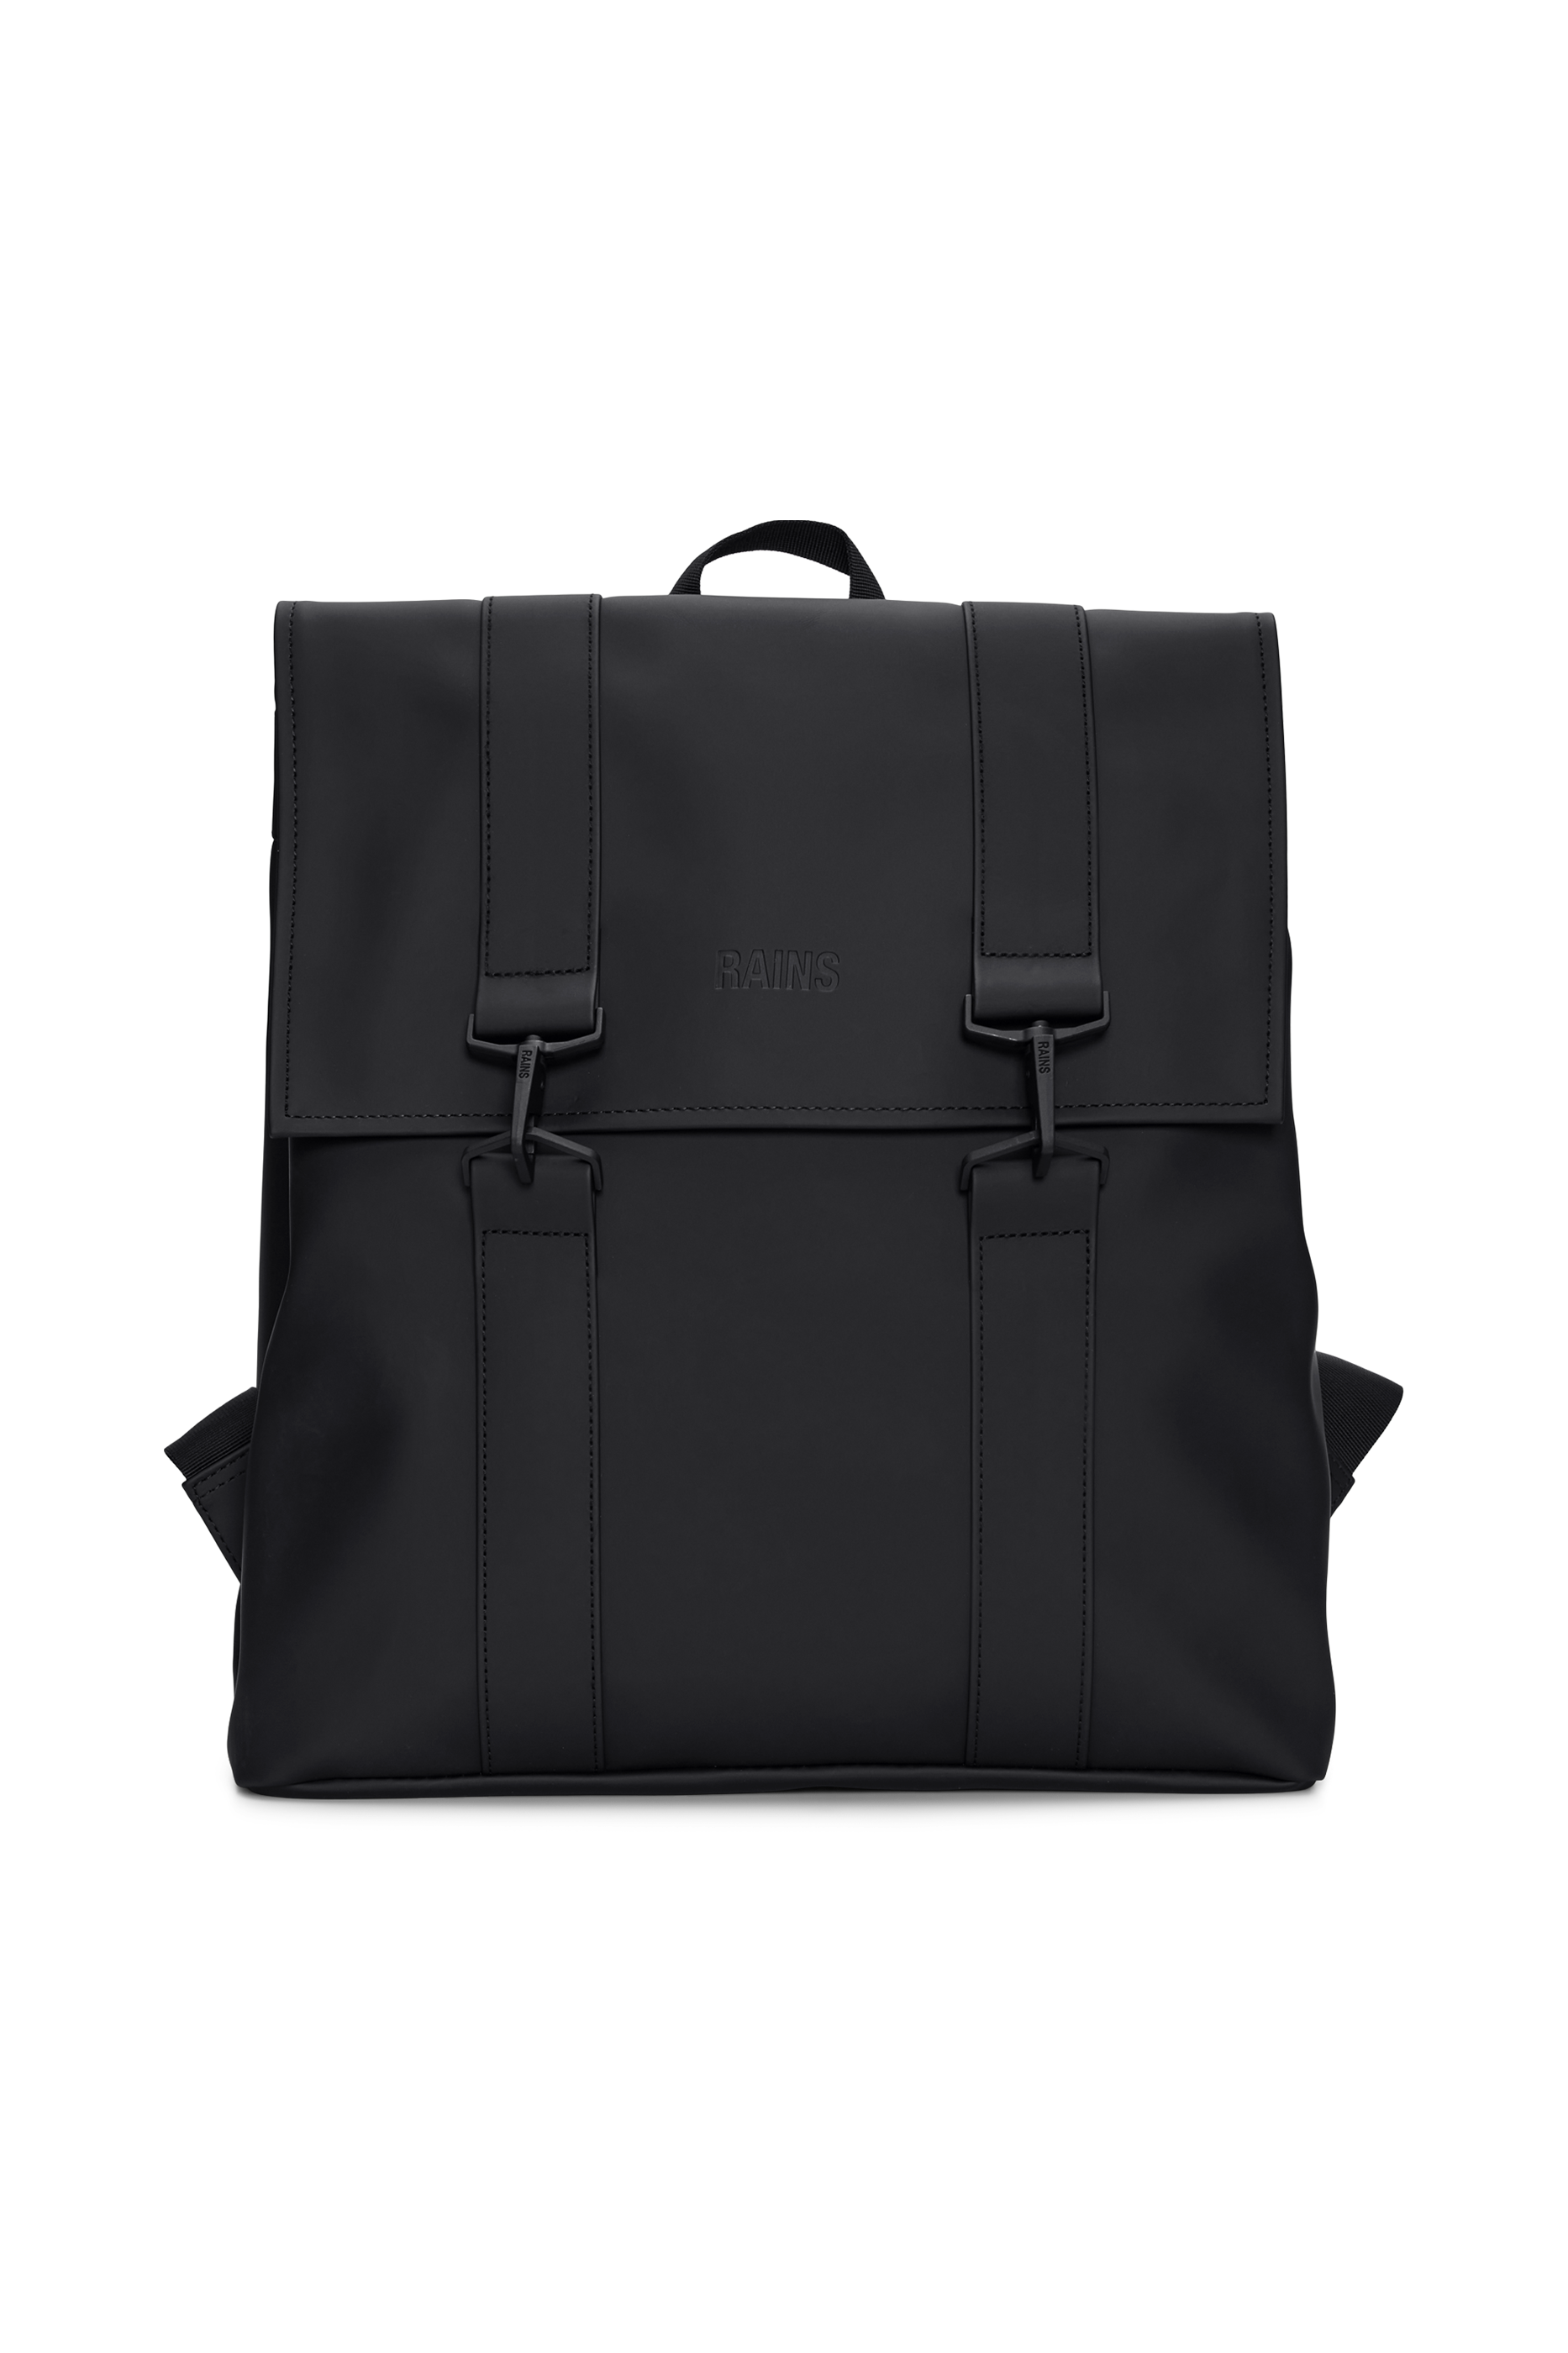 Rains® MSN Bag in Black for $160 | Free Shipping